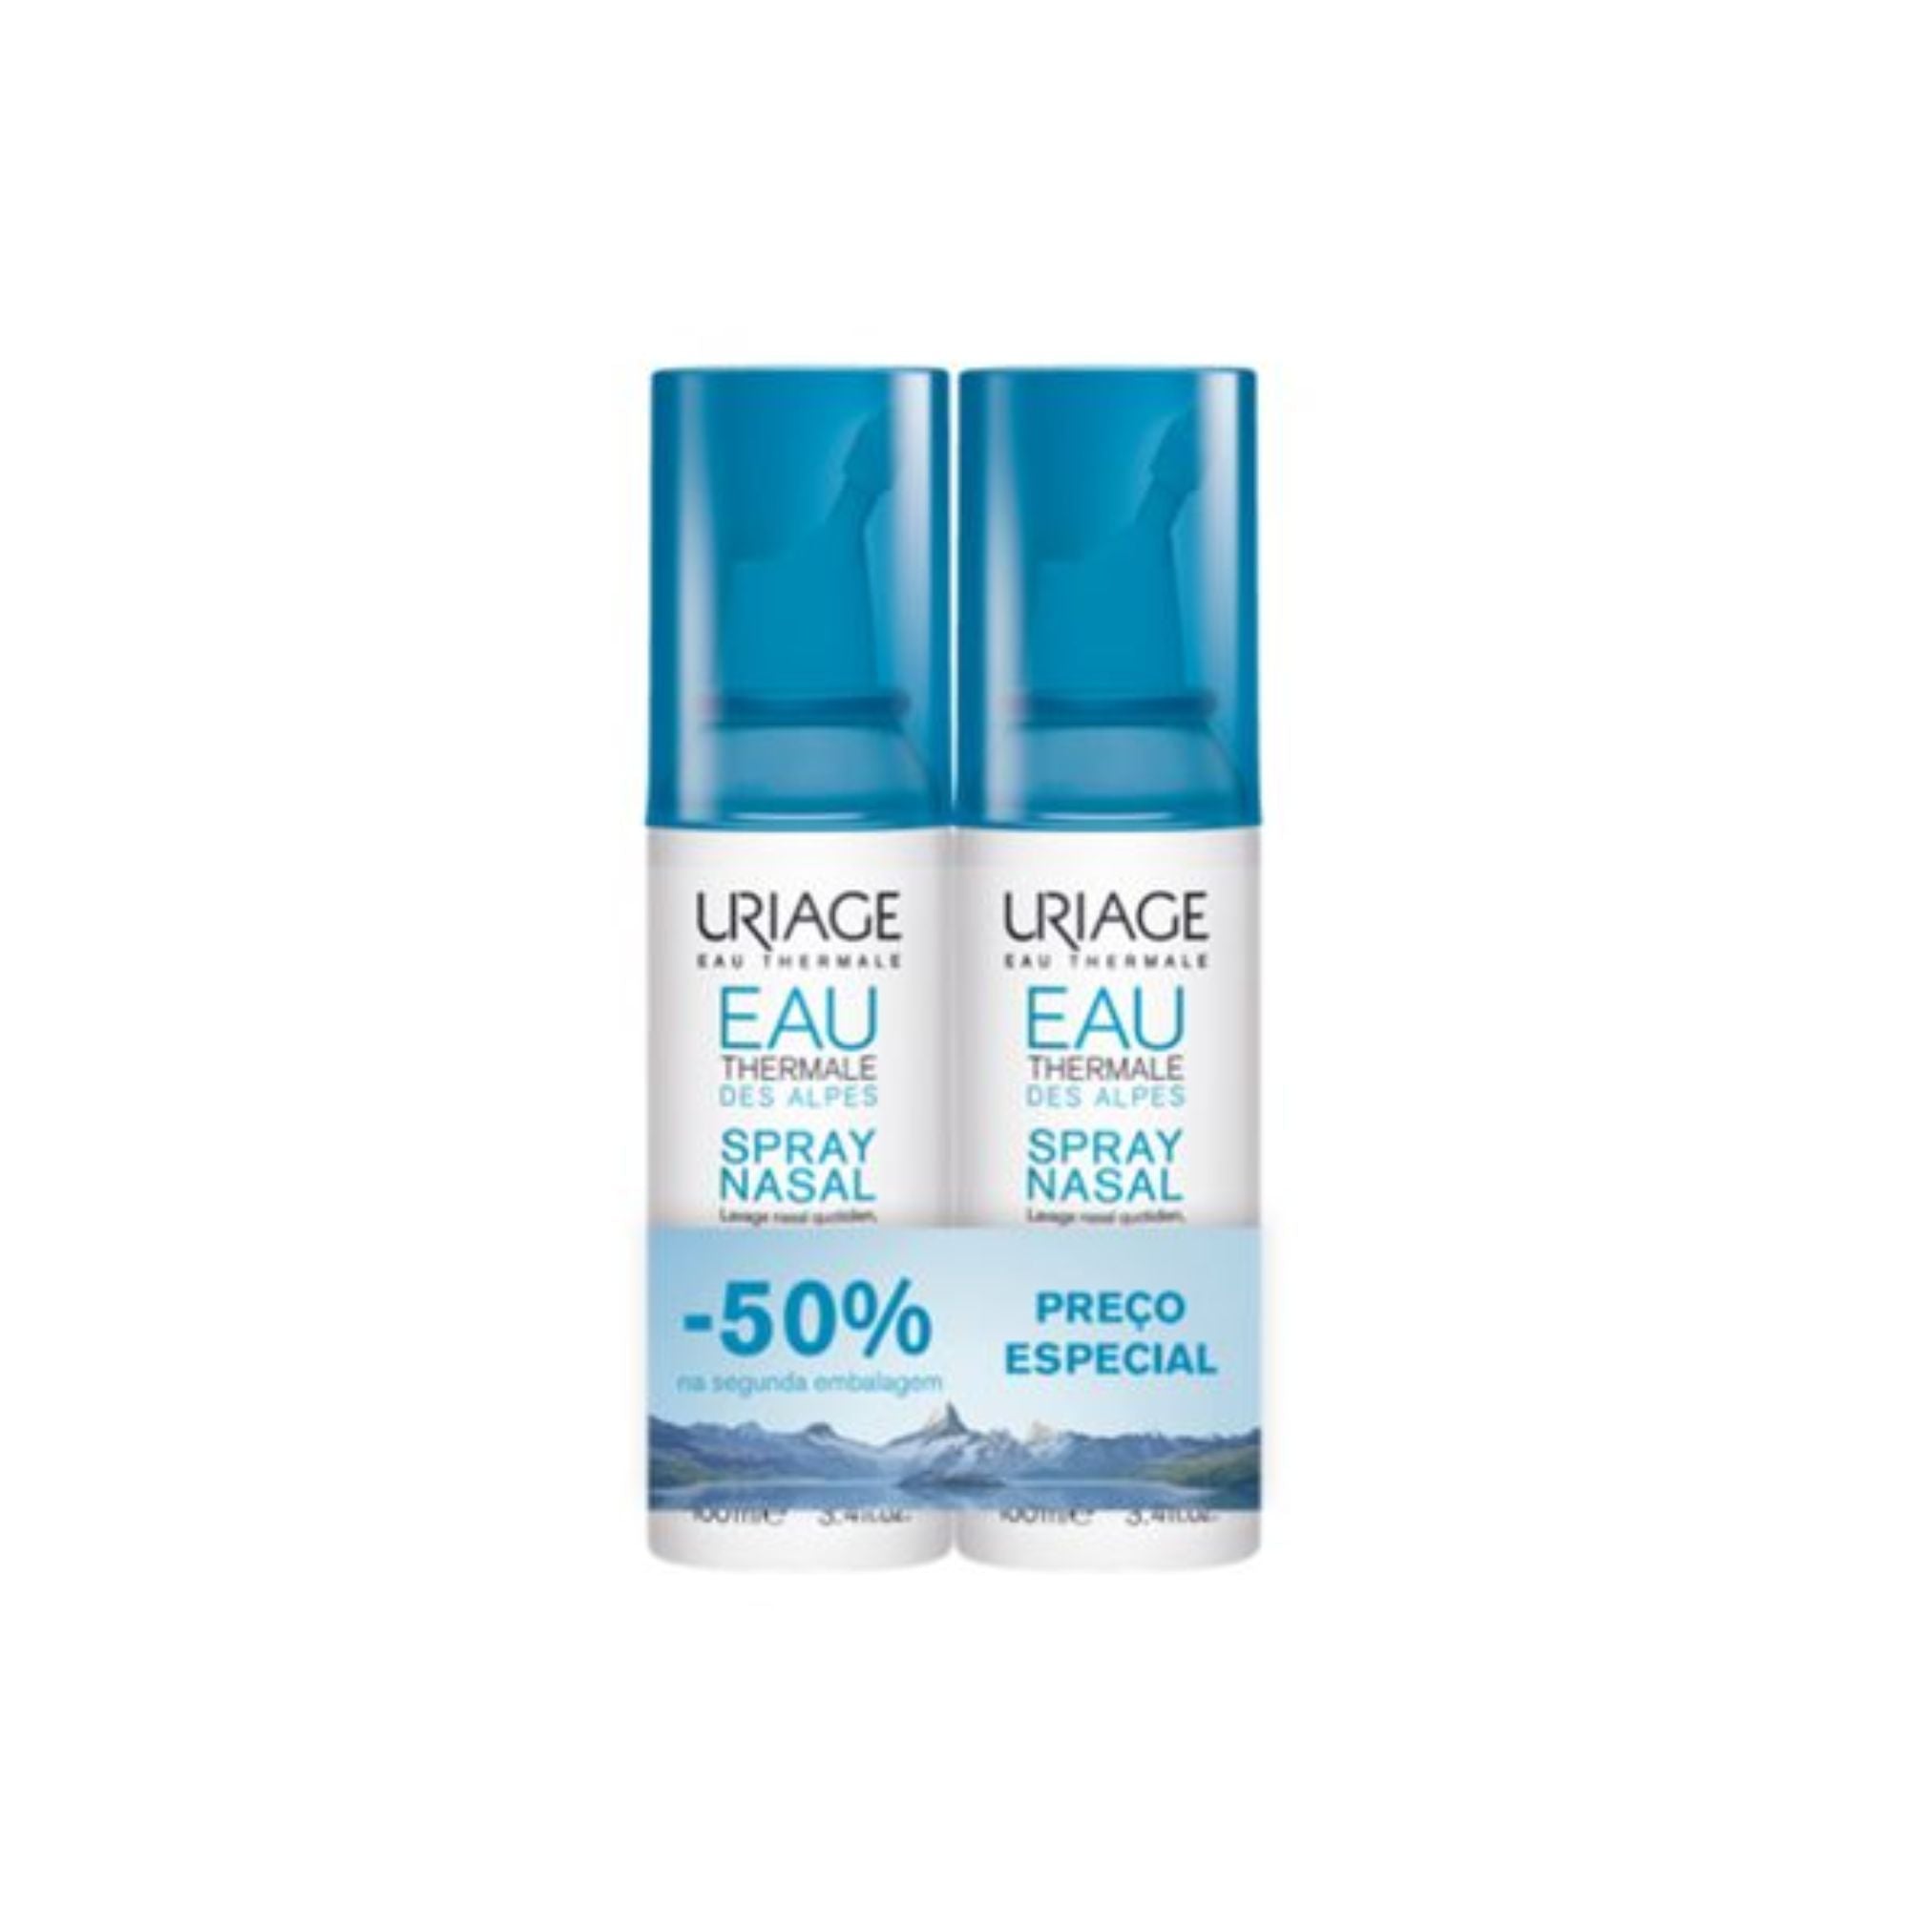 Uriage Pack Promocional: Uriage Eau Thermale Spray Nasal 2x100ml